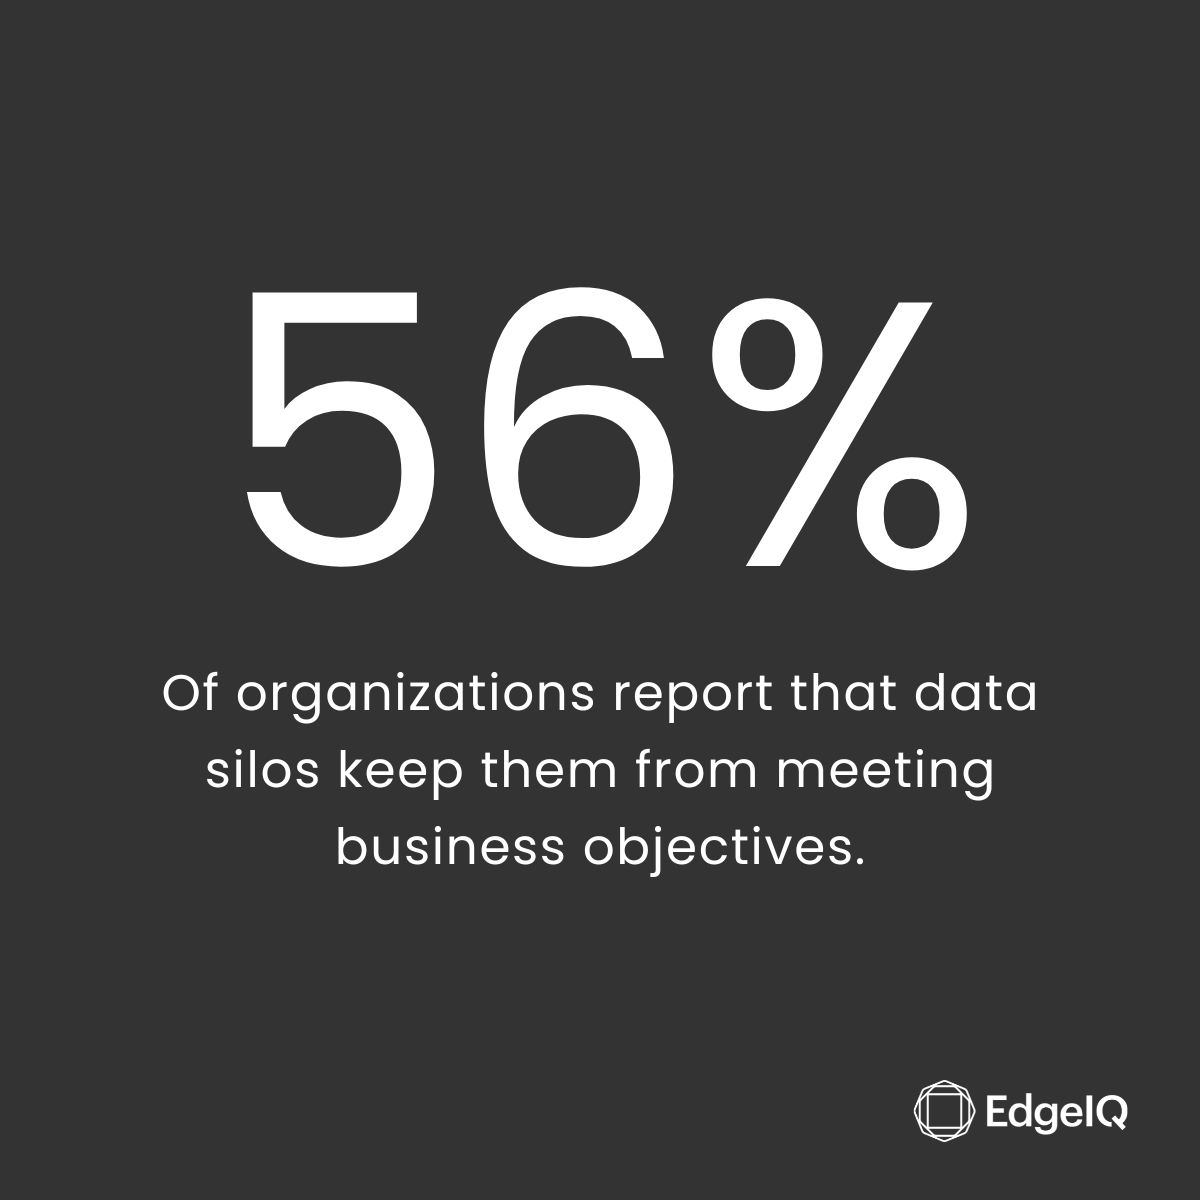 56% of businesses are held back by data silos. For #IoT companies, good data management is a must. Learn 6 capabilities you need from EdgeIQ: edgeiq.ai/blog/device-an…

#IoT #AWSIoT #AzureIoT #ConnectedProducts #DeviceManagement